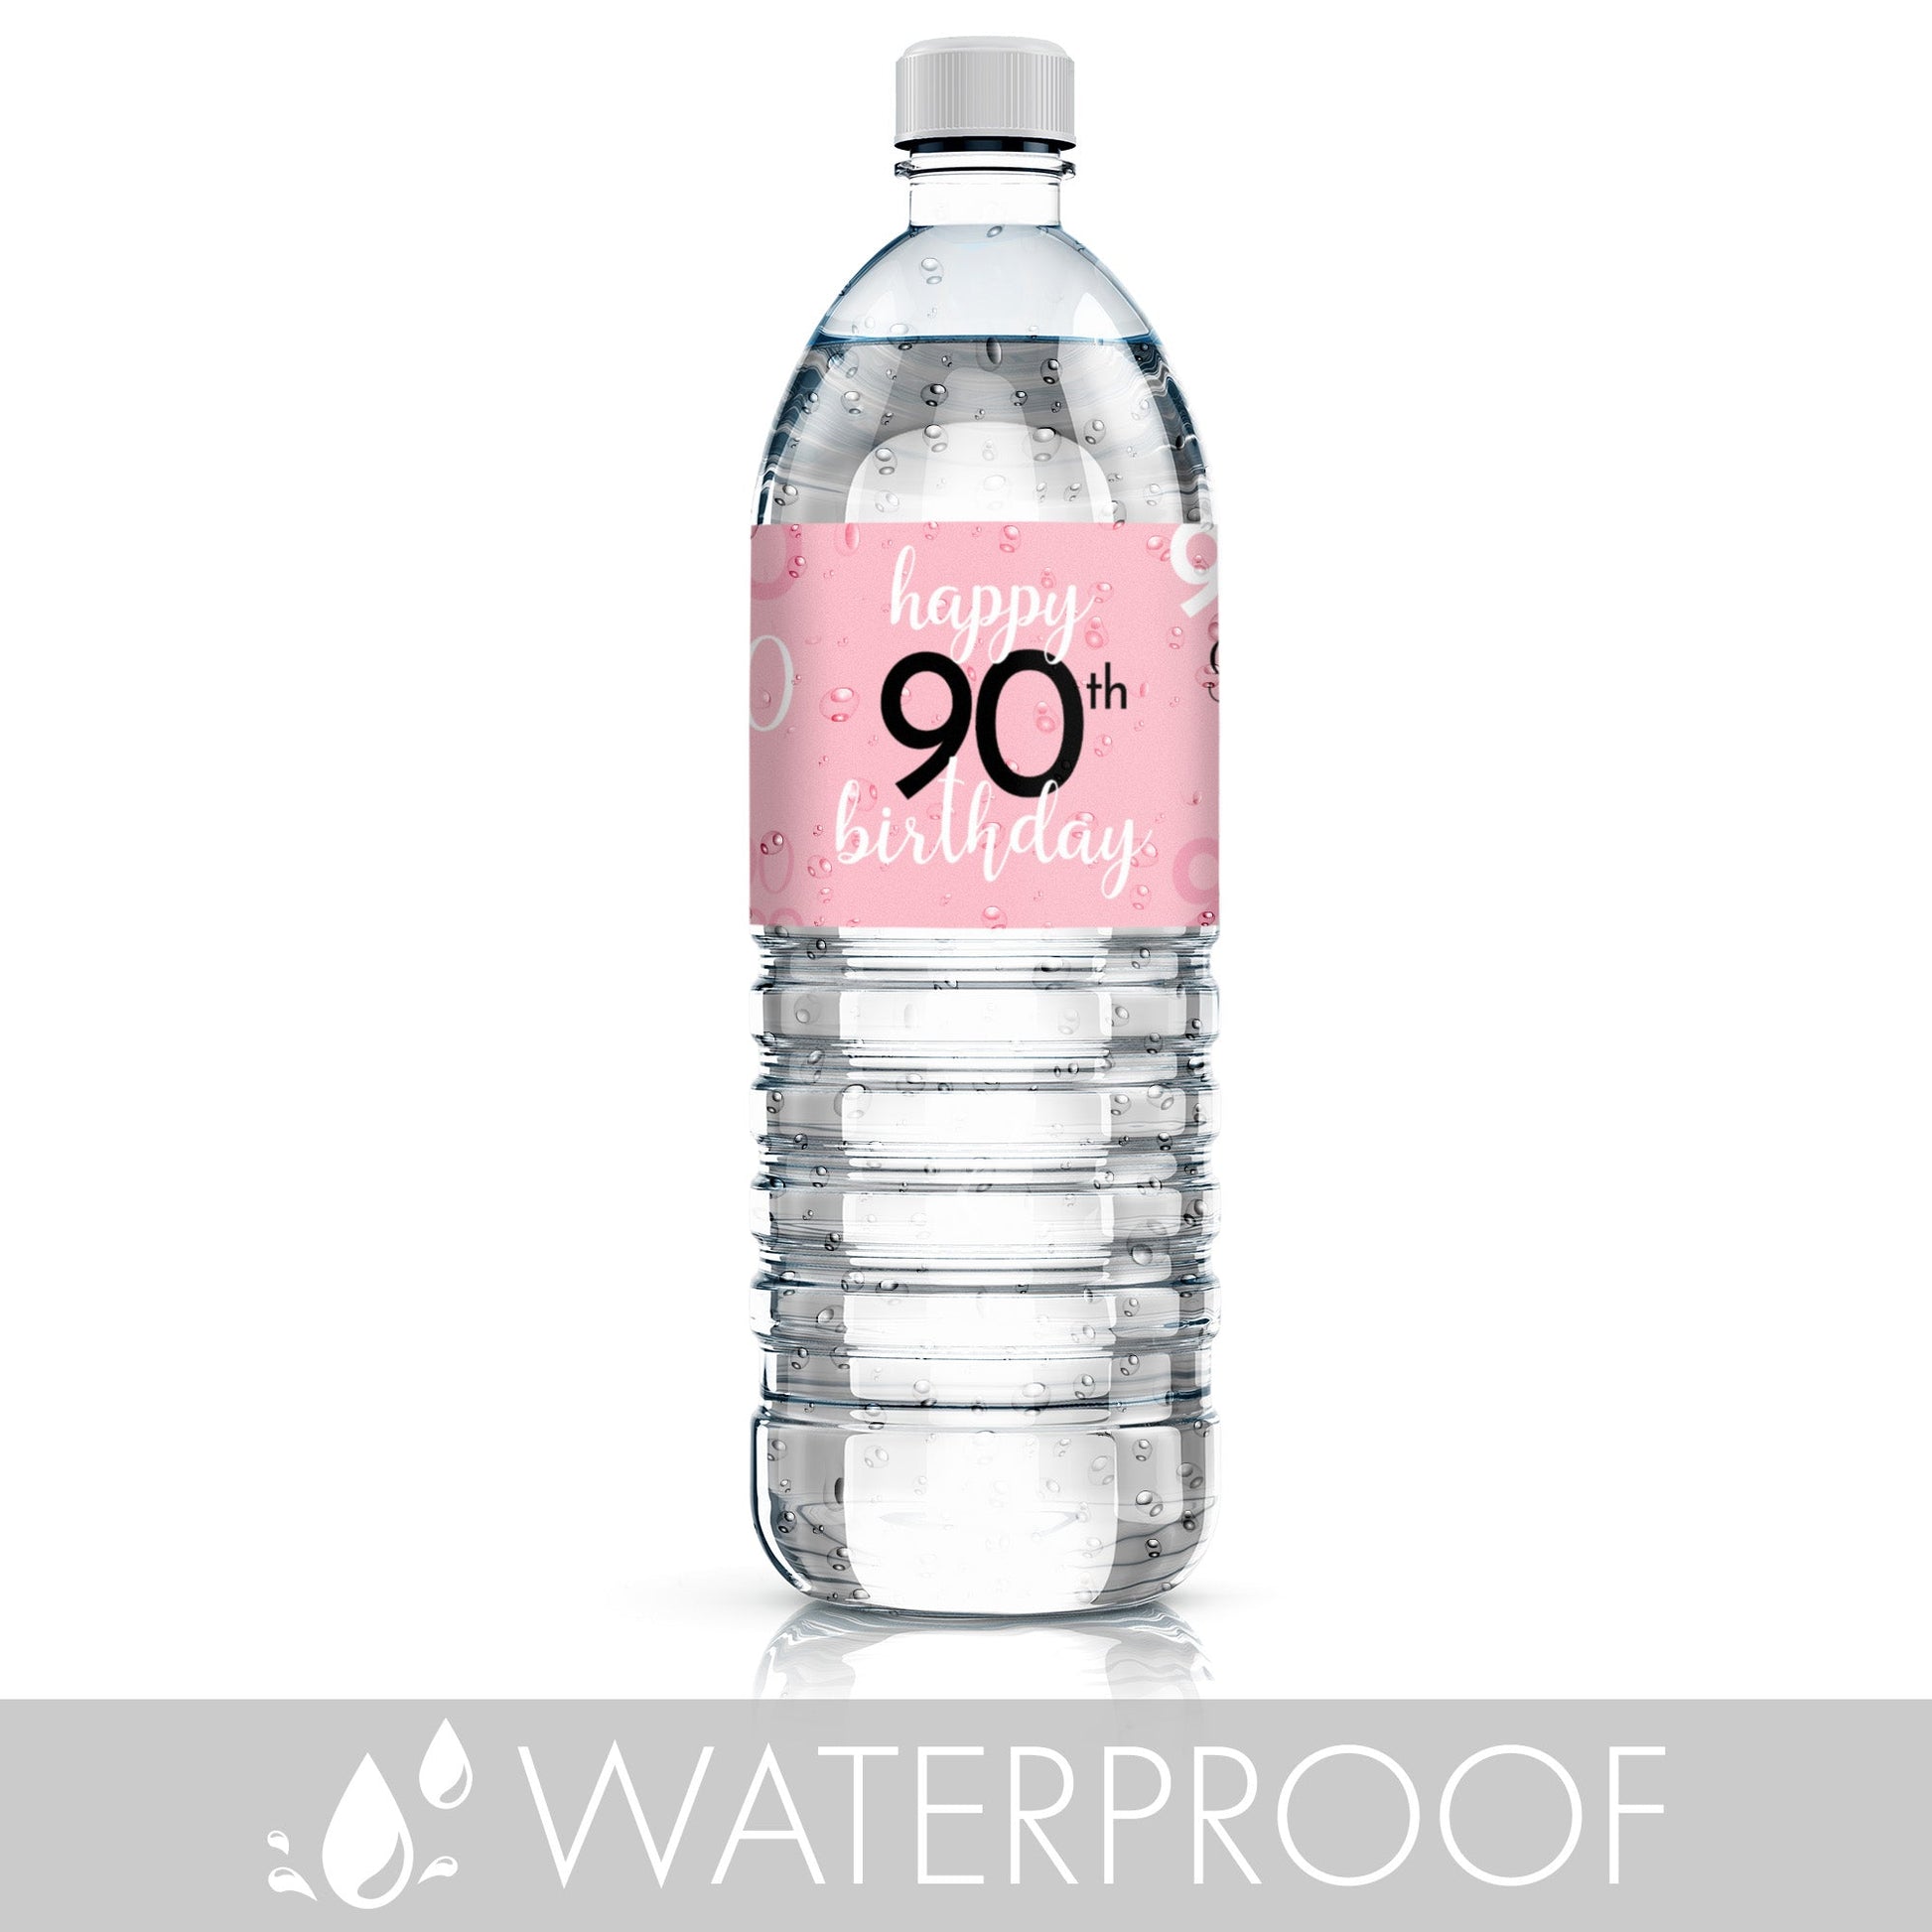 Personalize your water bottles with waterproof labels in a stylish 90th pink and black design